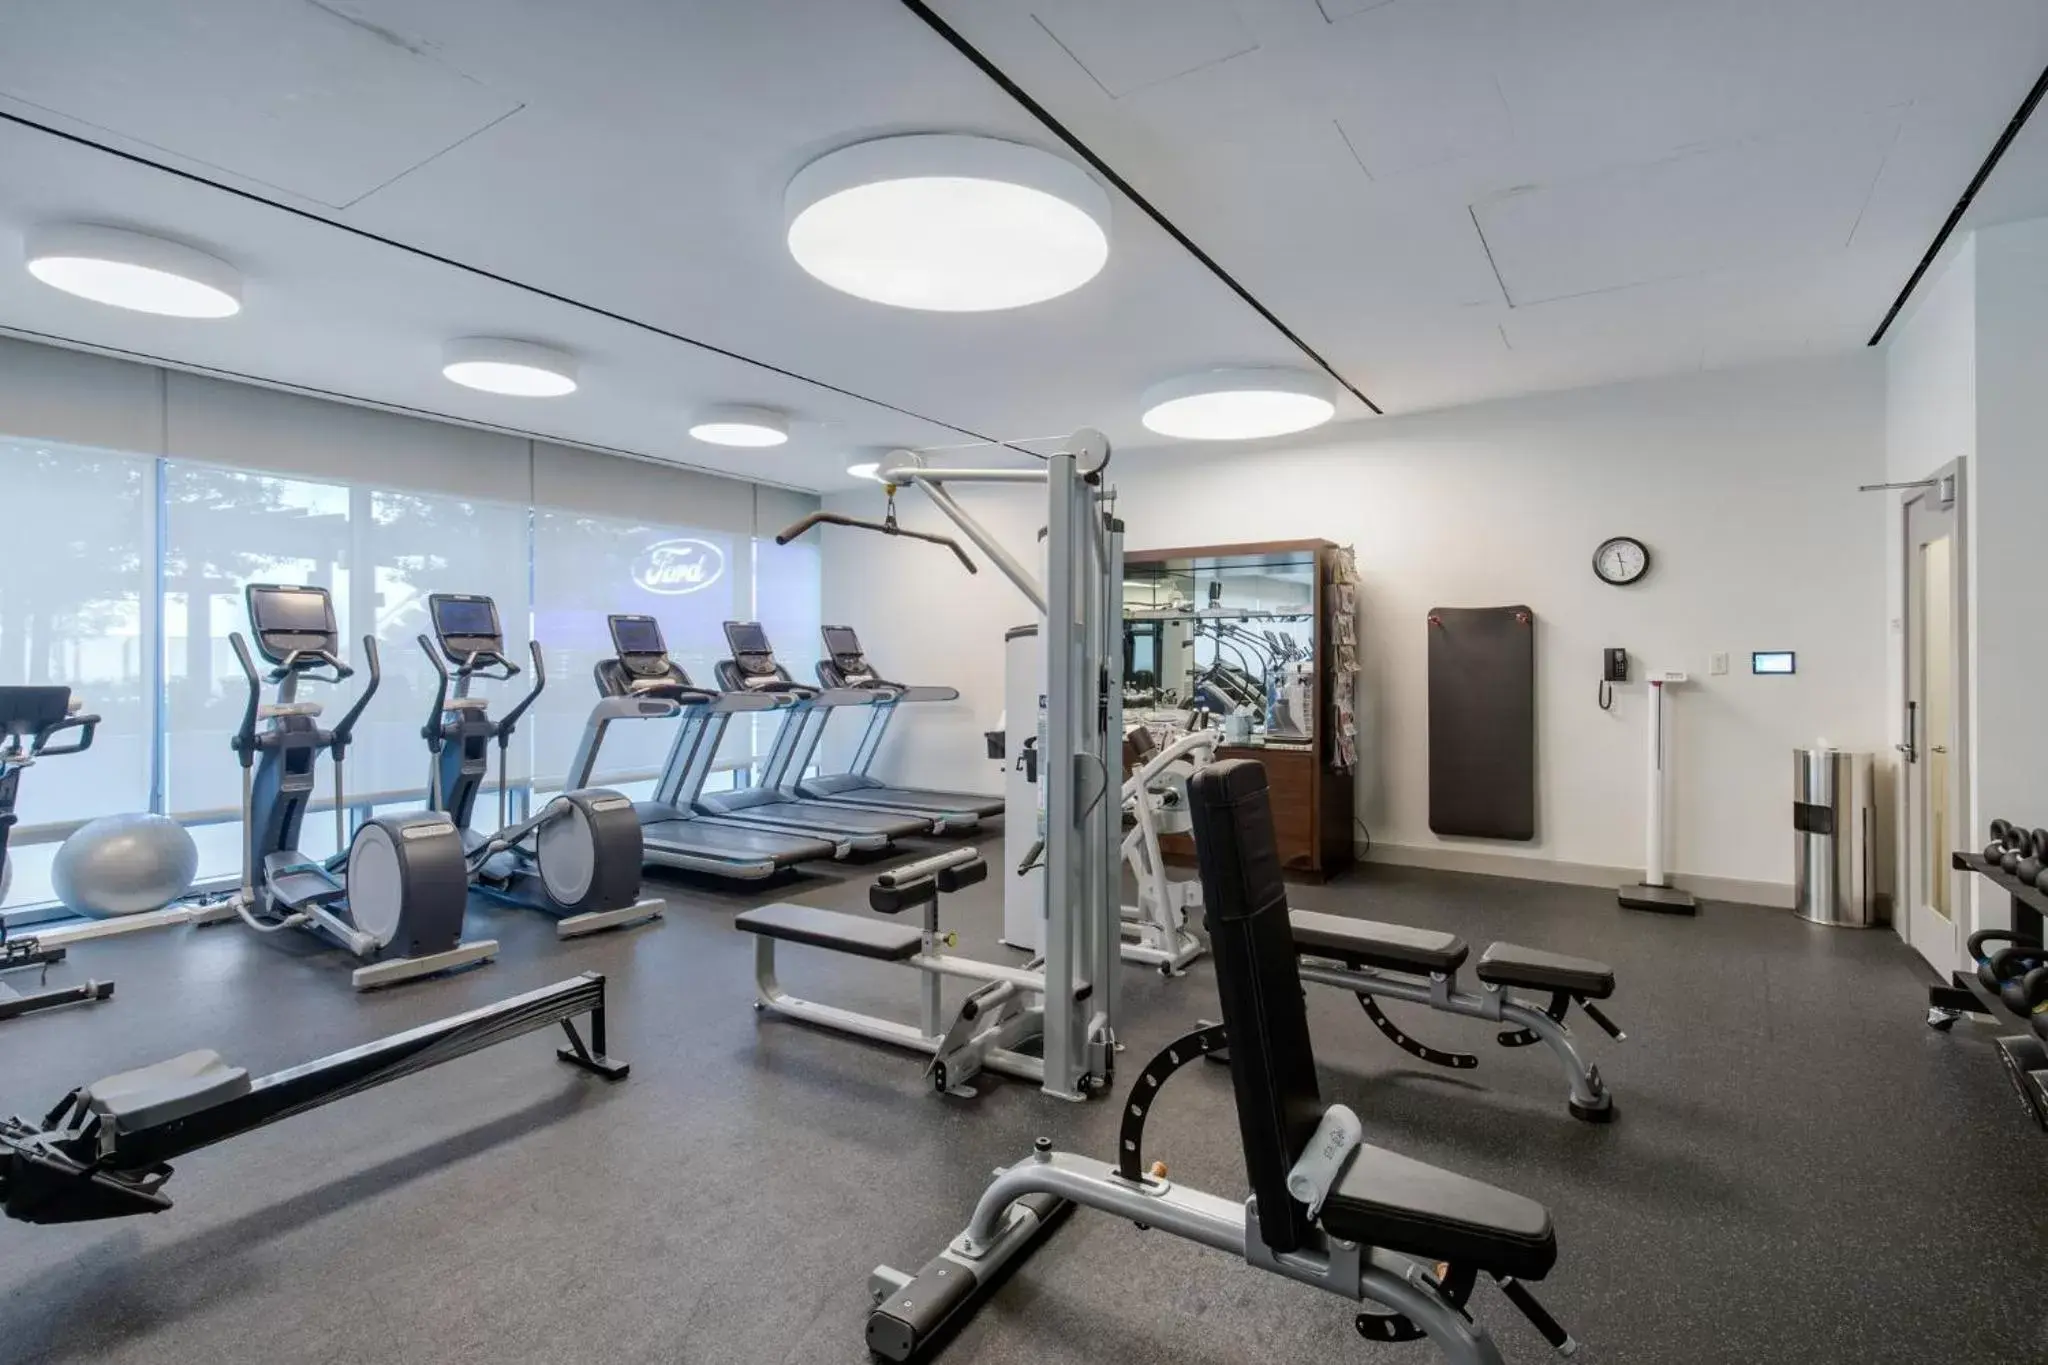 Fitness centre/facilities, Fitness Center/Facilities in Omni Frisco at The Star